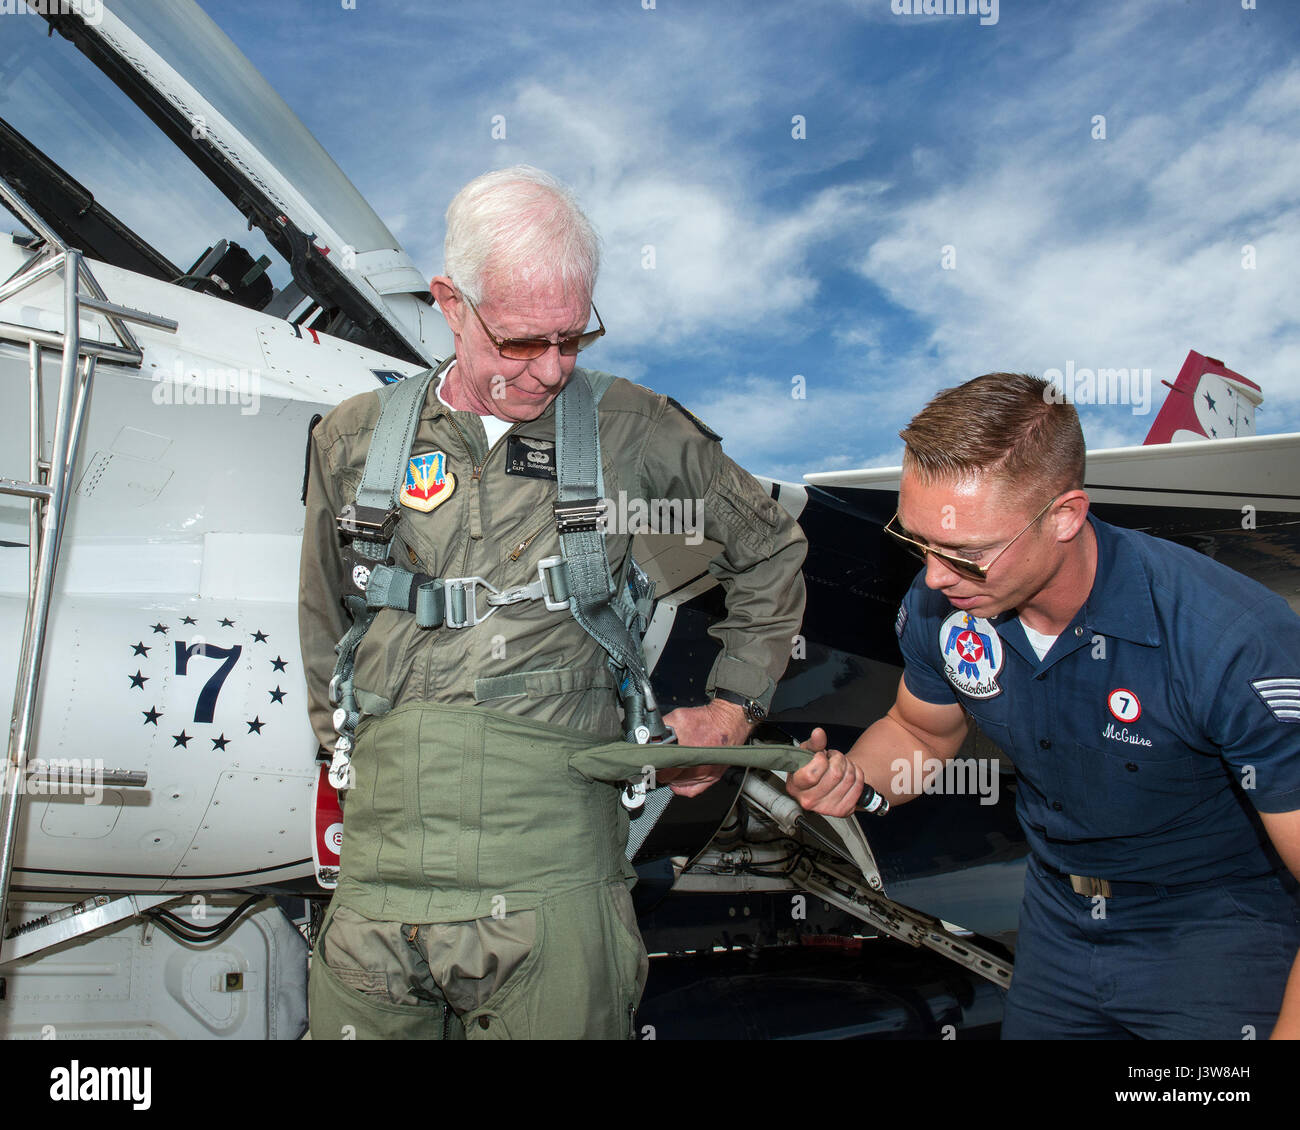 Former airline pilot Chesley “Sully” Sullenberger III puts on his G-suit before his flight with the United States Air Force Thunderbirds at Travis Air Force Base, Calif., May 4, 2017. Sullenberger is a 1973 Air Force Academy graduate and is best known for successfully landing a crippled airliner in the Hudson River saving the lives of a 155 passengers. (U.S. Air Force photo by Louis Briscese) Stock Photo